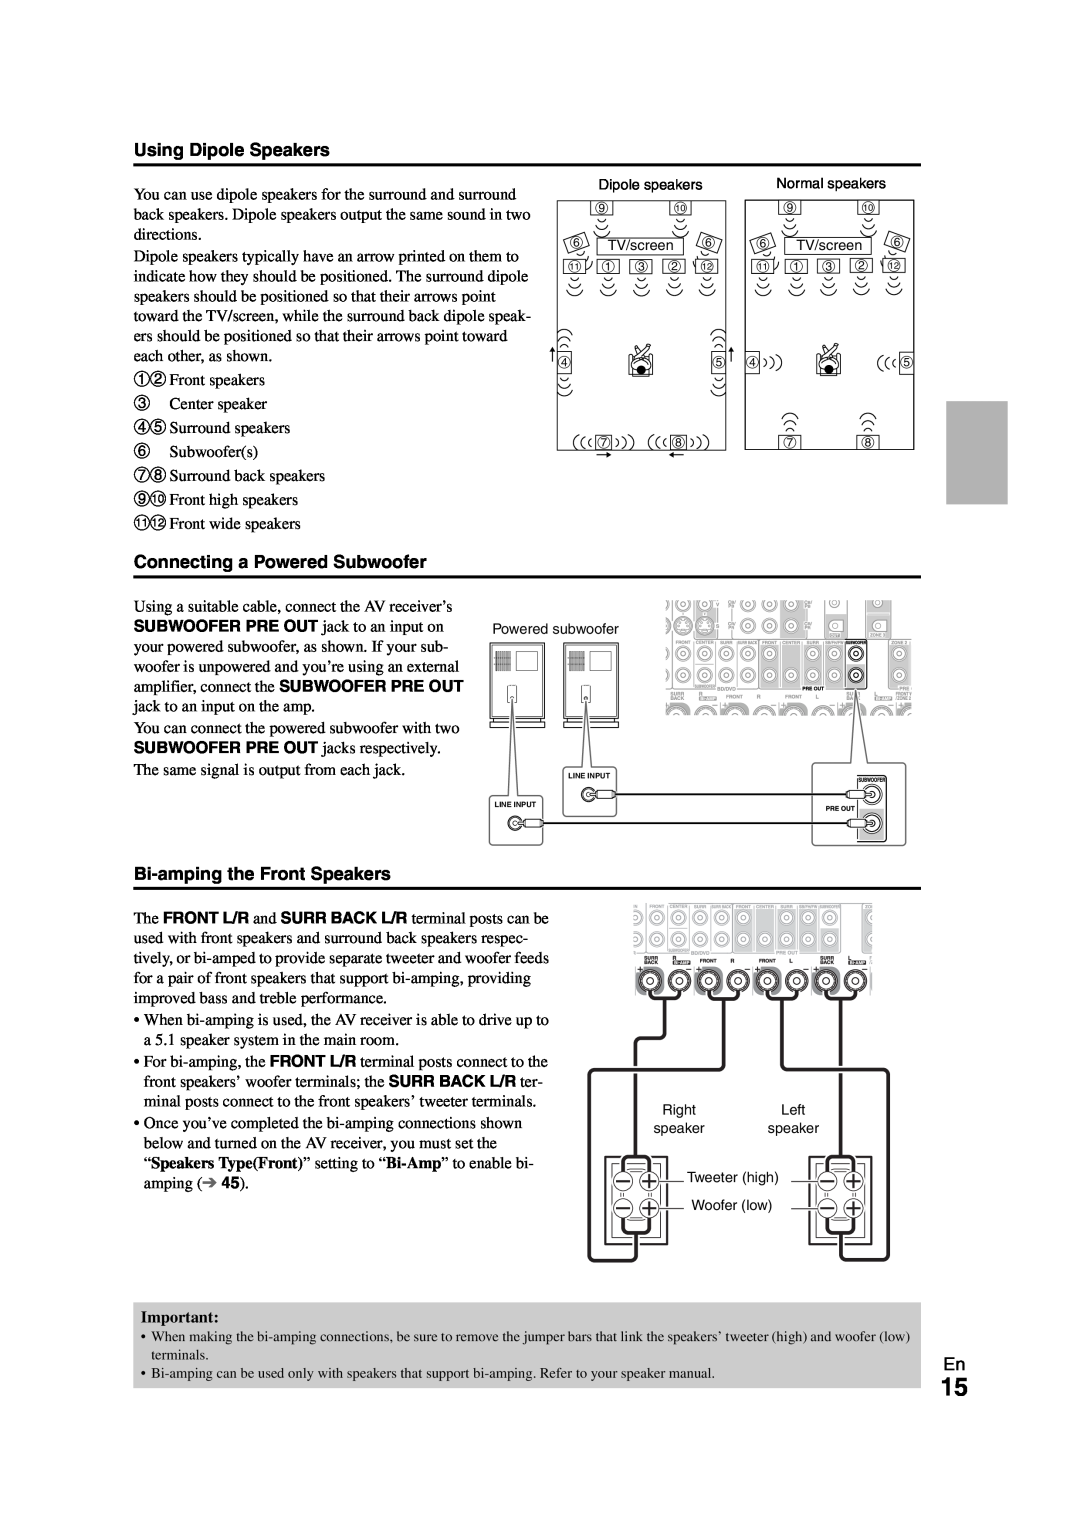 Onkyo TX-NR808 instruction manual Using Dipole Speakers, Connecting a Powered Subwoofer, Bi-ampingthe Front Speakers 